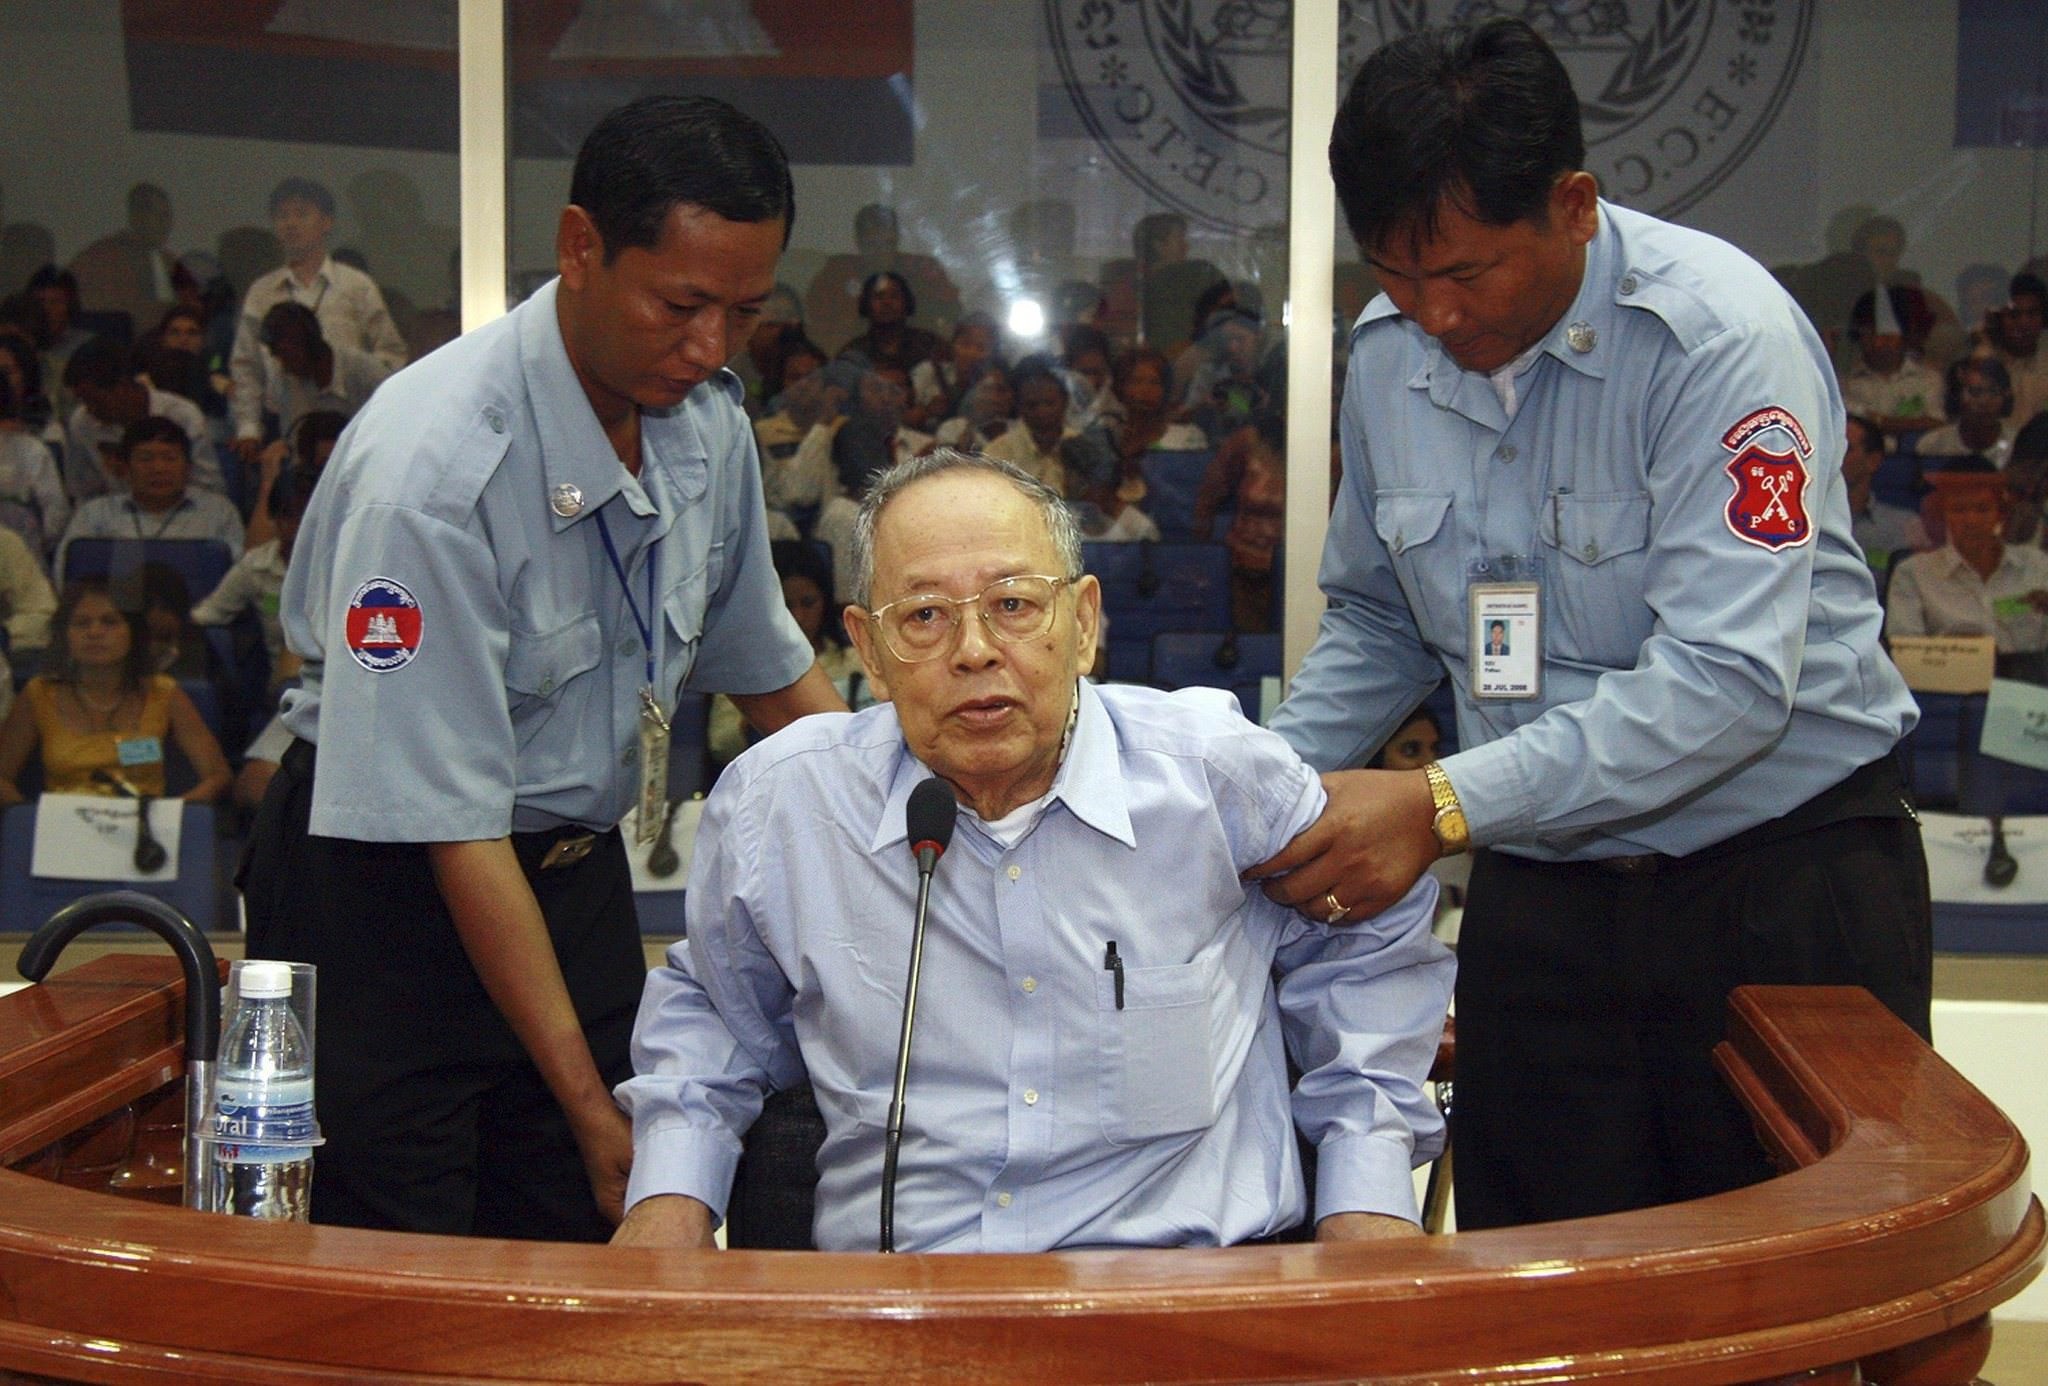 Former Khmer Rouge foreign minister Ieng Sary is assisted during his pre-trial hearing at the Extraordinary Chambers in the Courts of Cambodia (ECCC) in the outskirts of Phnom Penh in this June 30, 2008 file photo. (Reuters Photo)